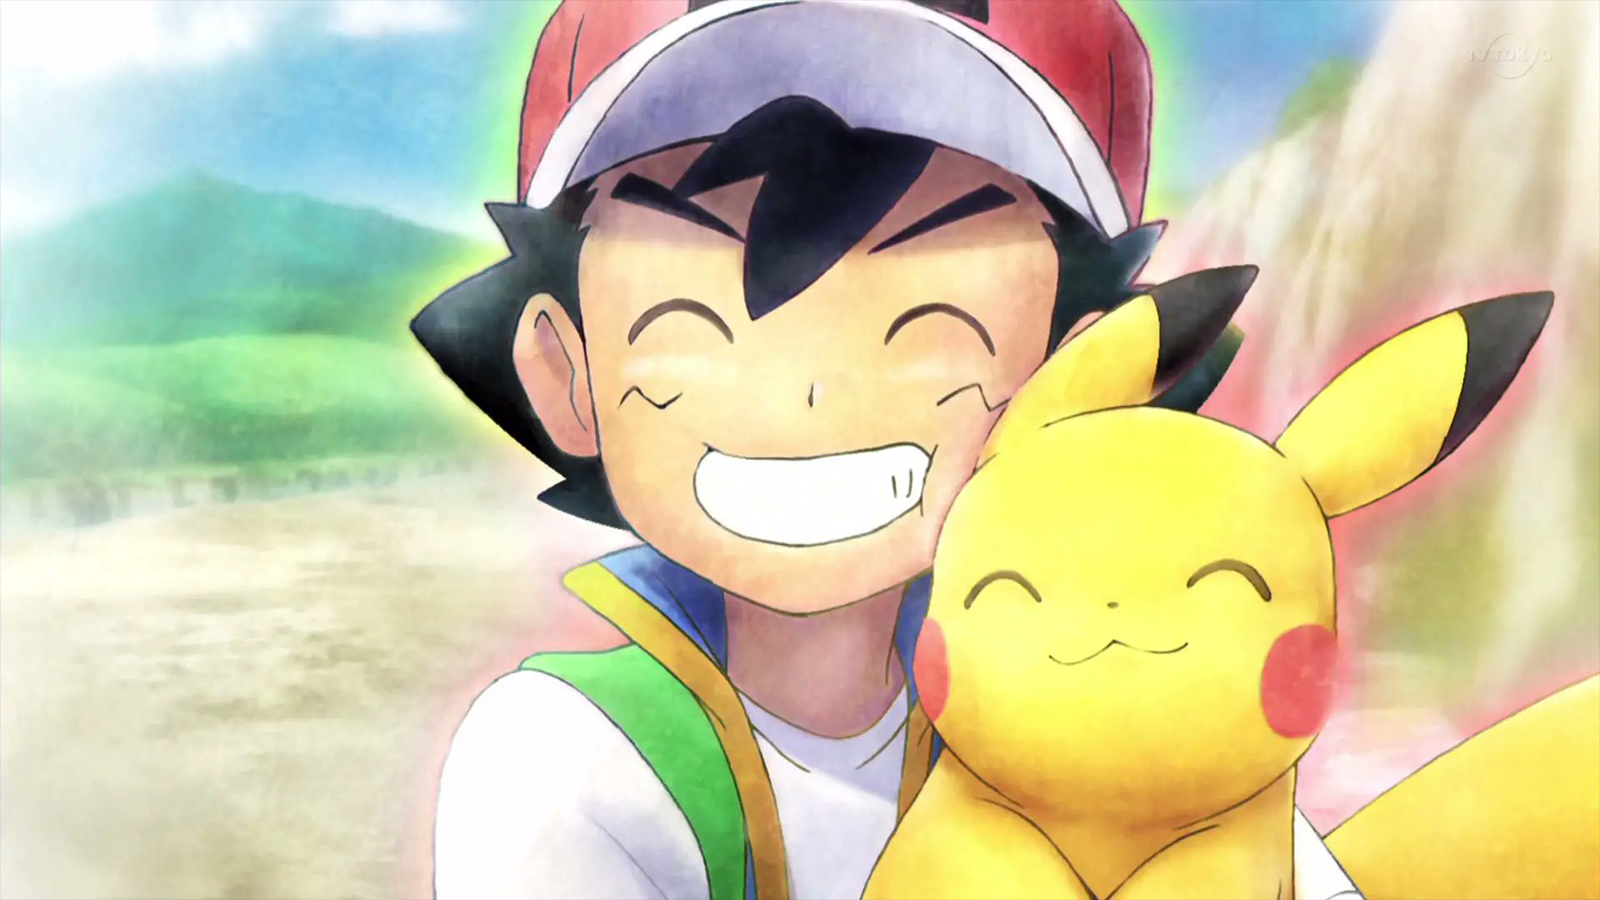 Pokémon anime and the most awaited reunion: Ash will be reunited with Misty  and Brock - Meristation